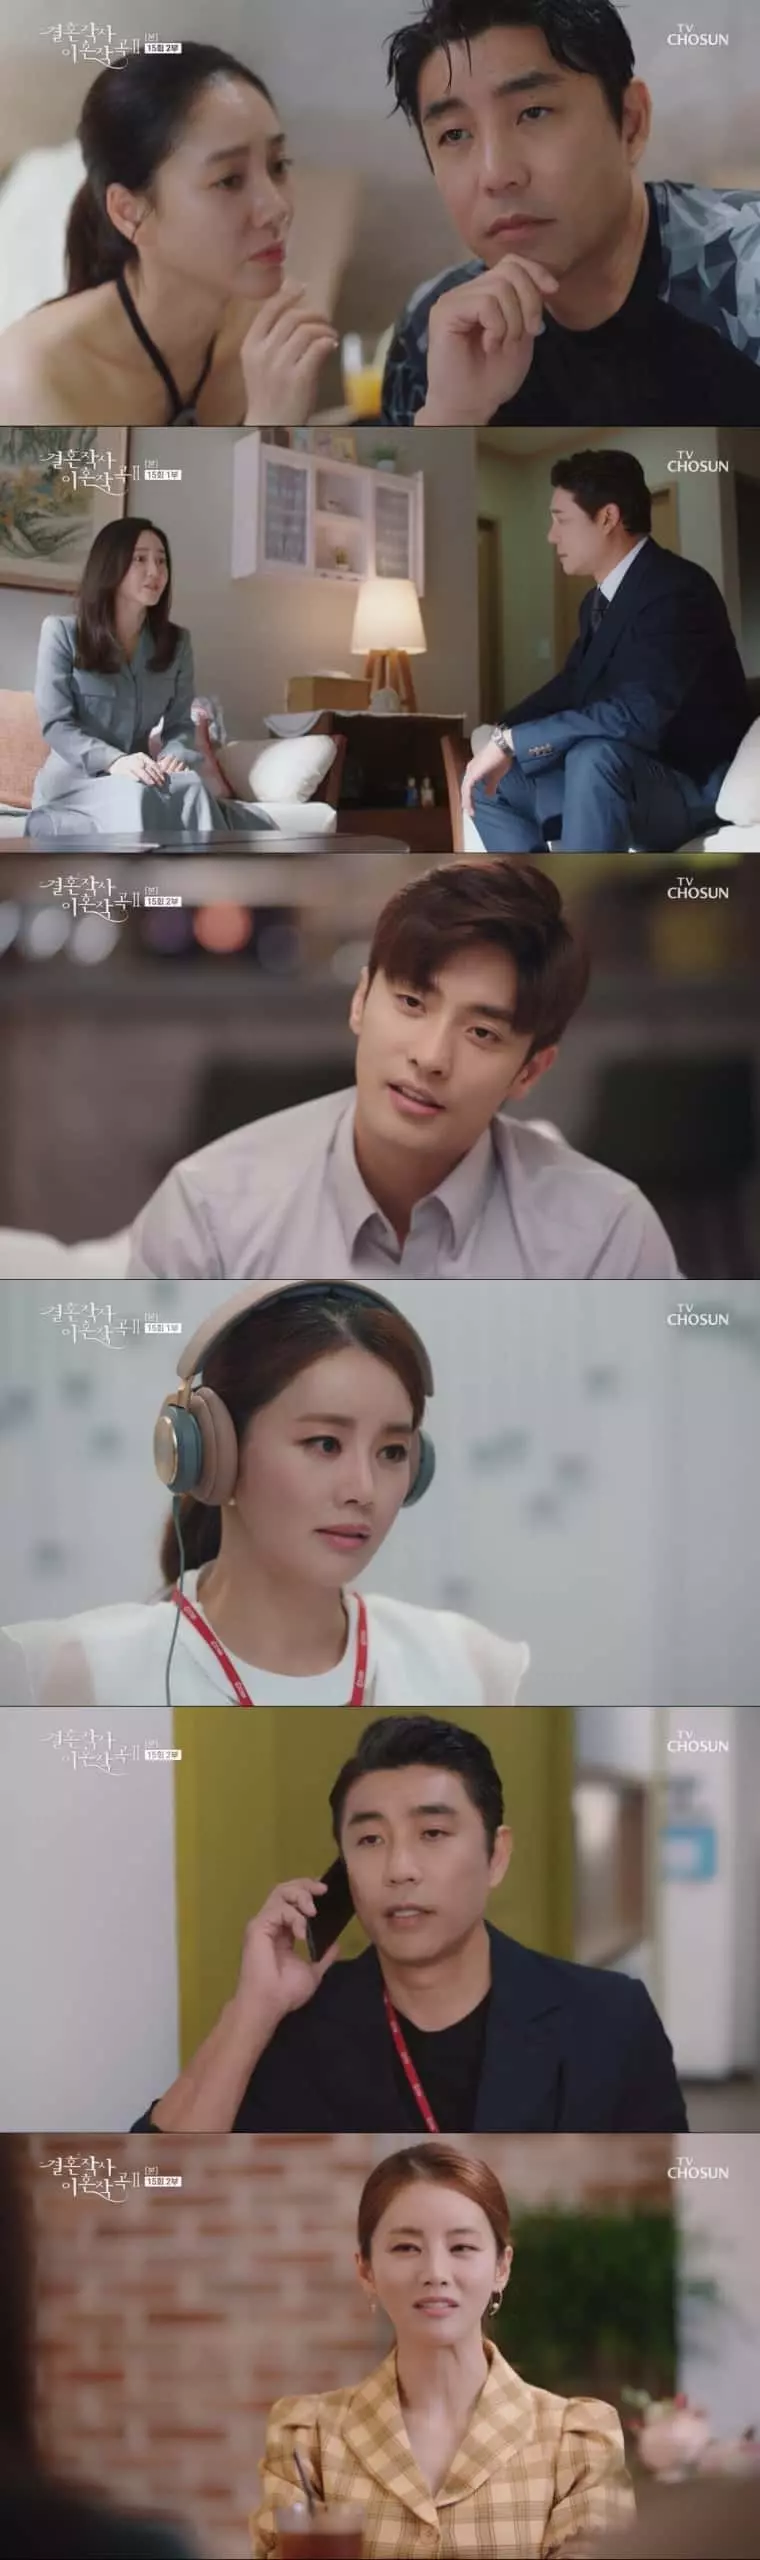 Love (ft. Marriage and Divorce) 2 EP.15